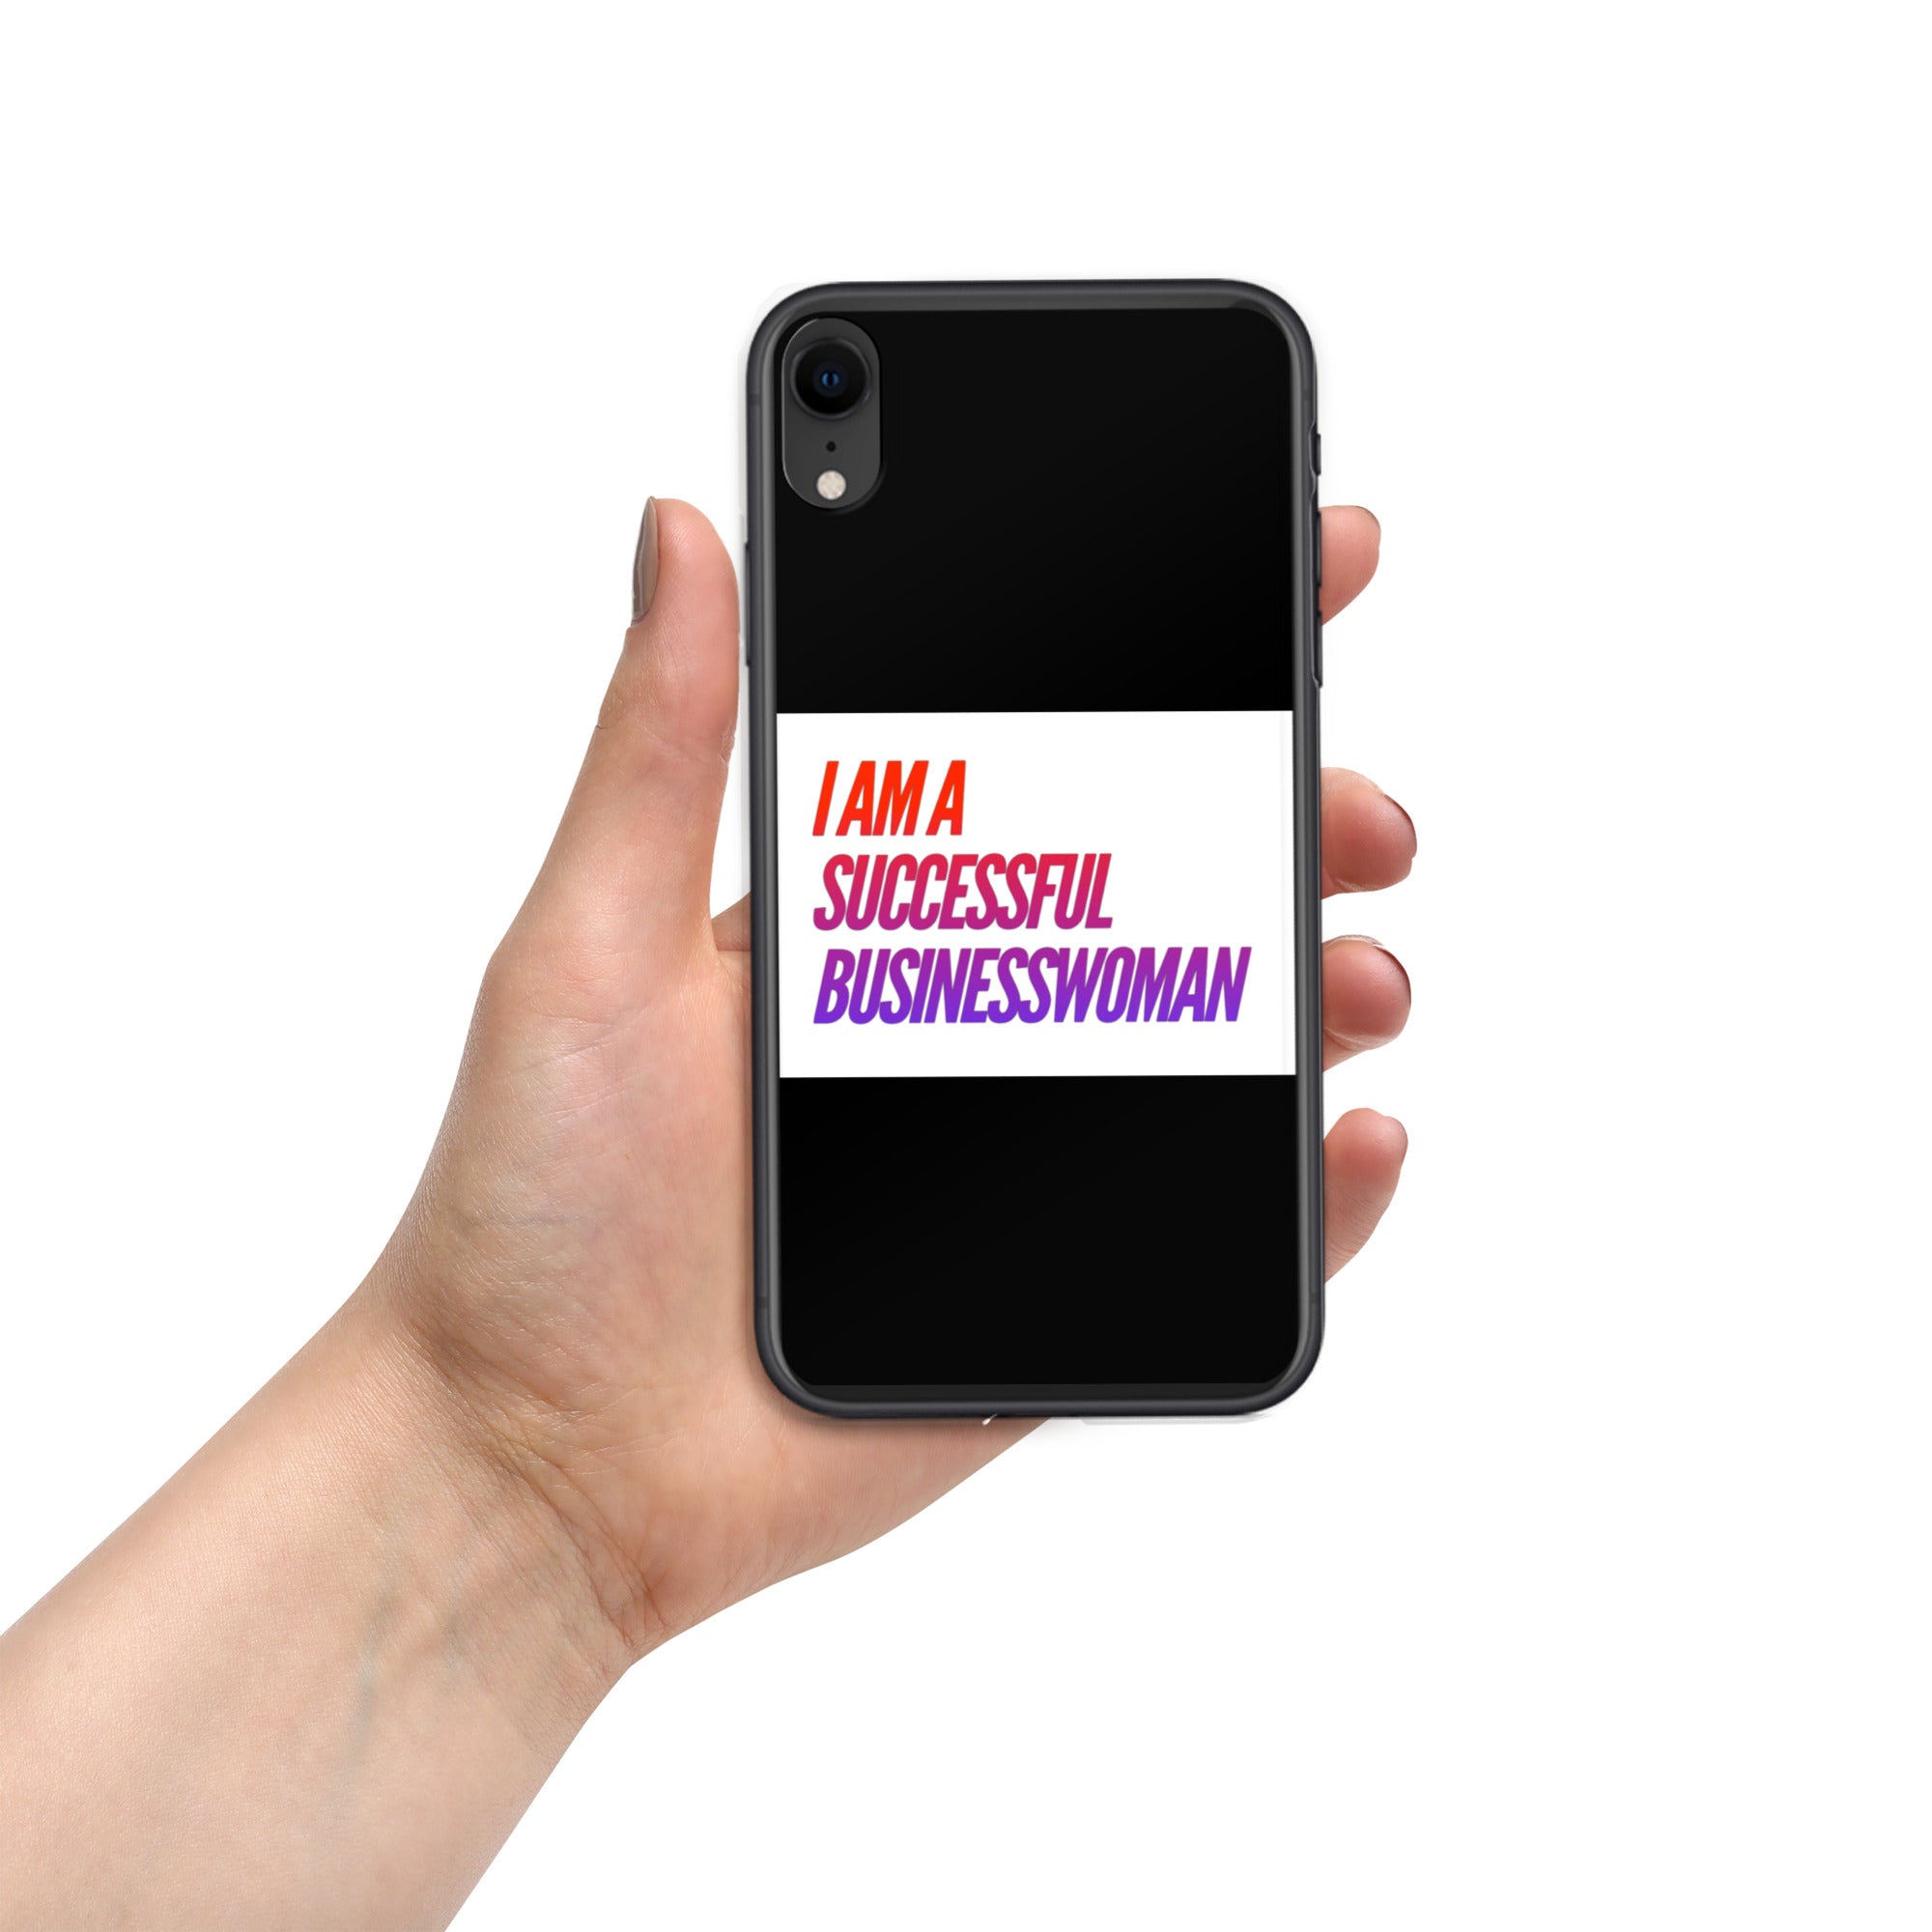 GloWell Designs - iPhone Case - Affirmation Quote - I Am A Successful Businesswoman - GloWell Designs